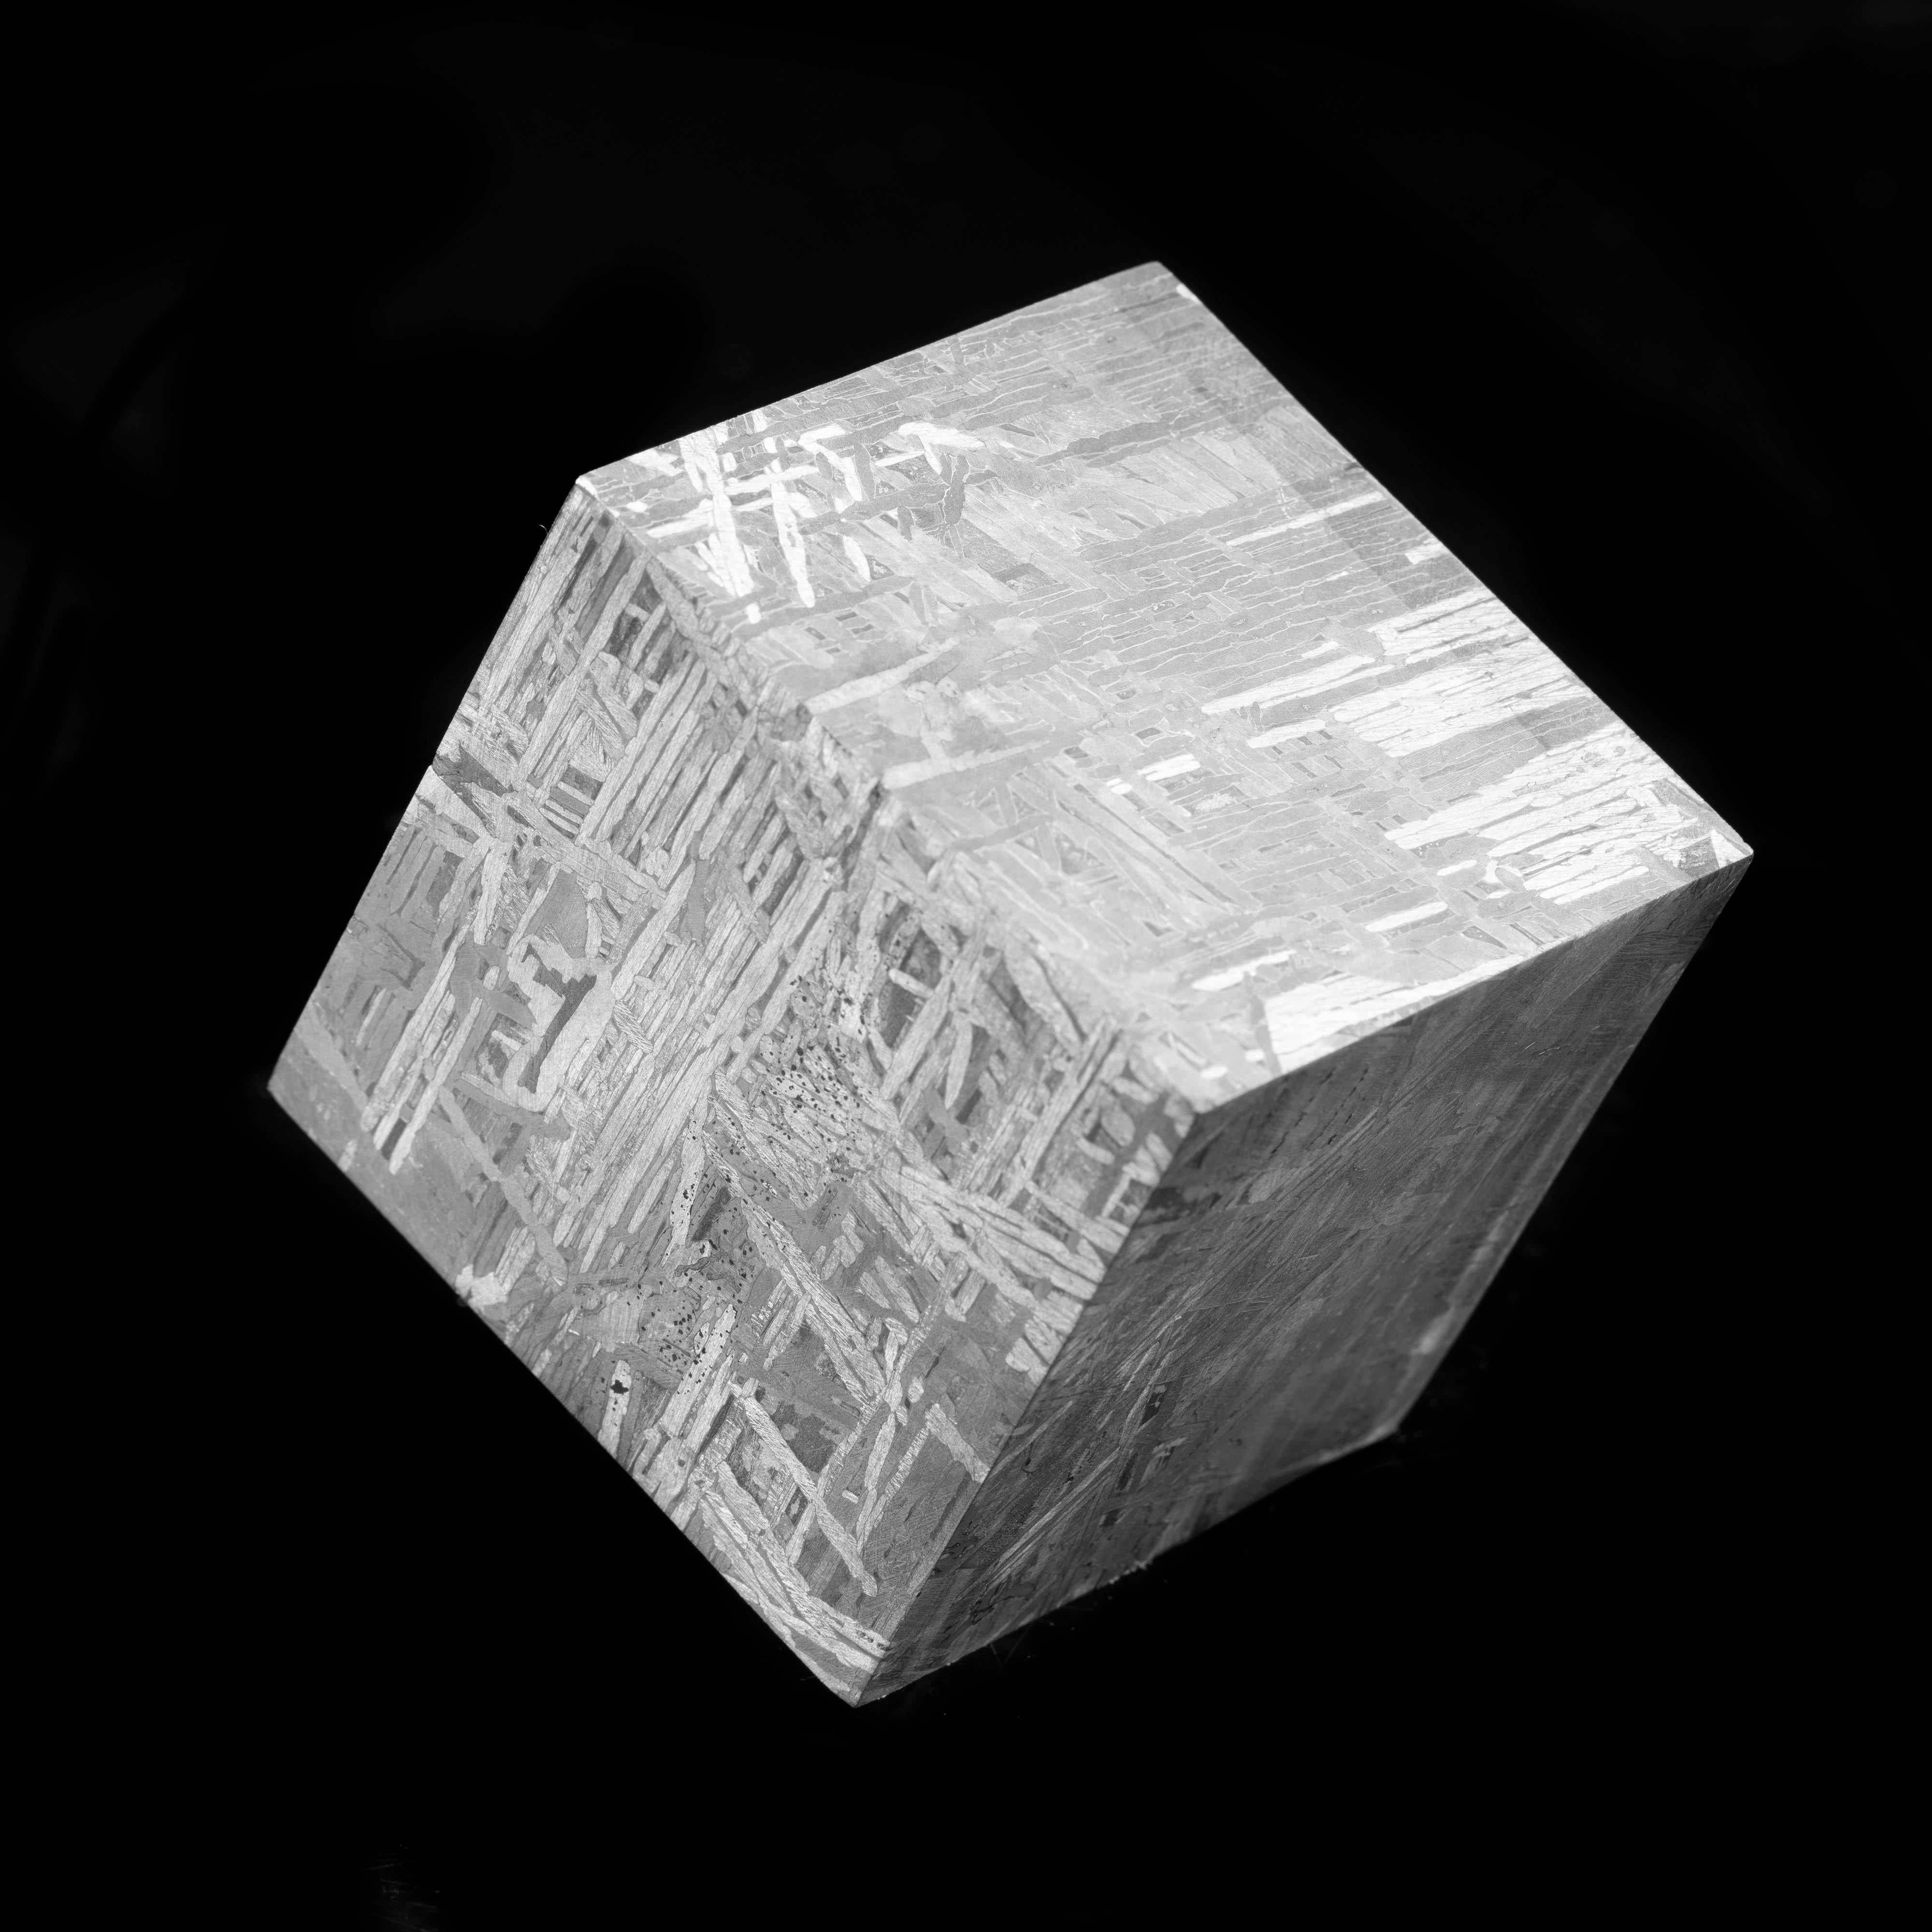 This piece displays the beauty of the Muonionalusta meteorite in the form of a cube. Muonionalusta is a meteorite classified as a fine octahedrite which impacted in northern Scandinavia west of the border between Sweden and Finland about one million